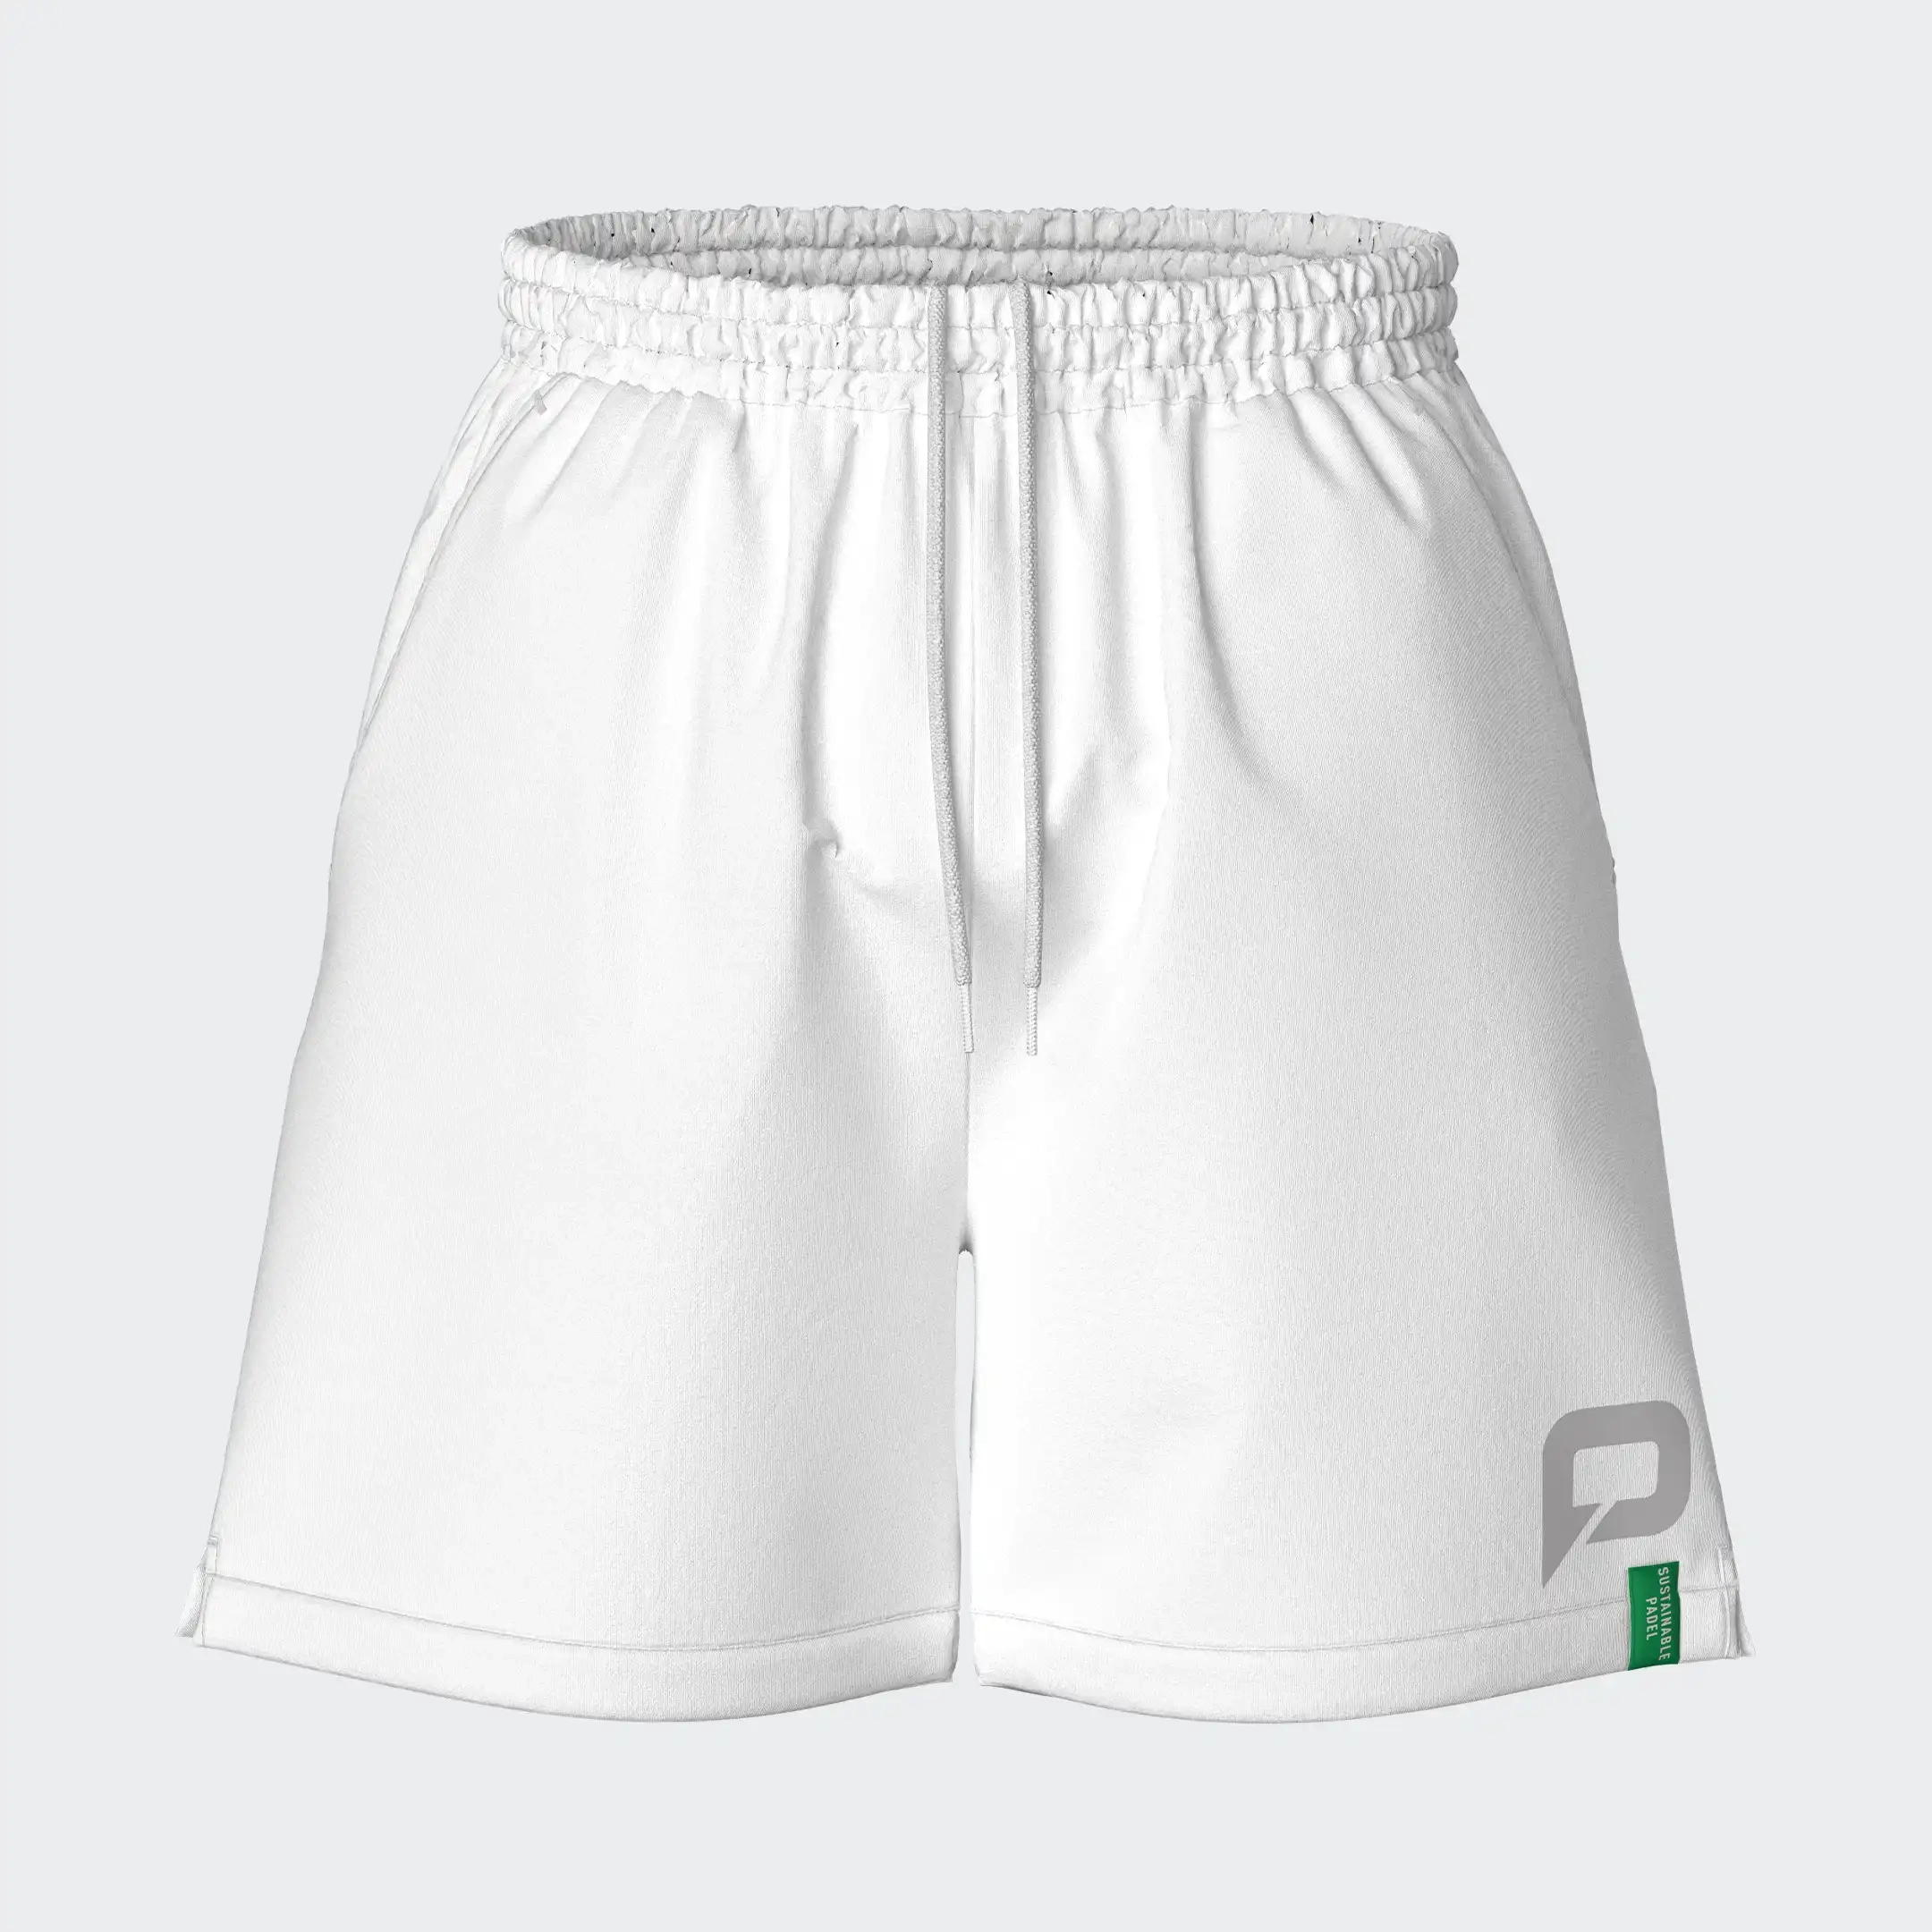 Pallap Competition Shorts white/cool grey